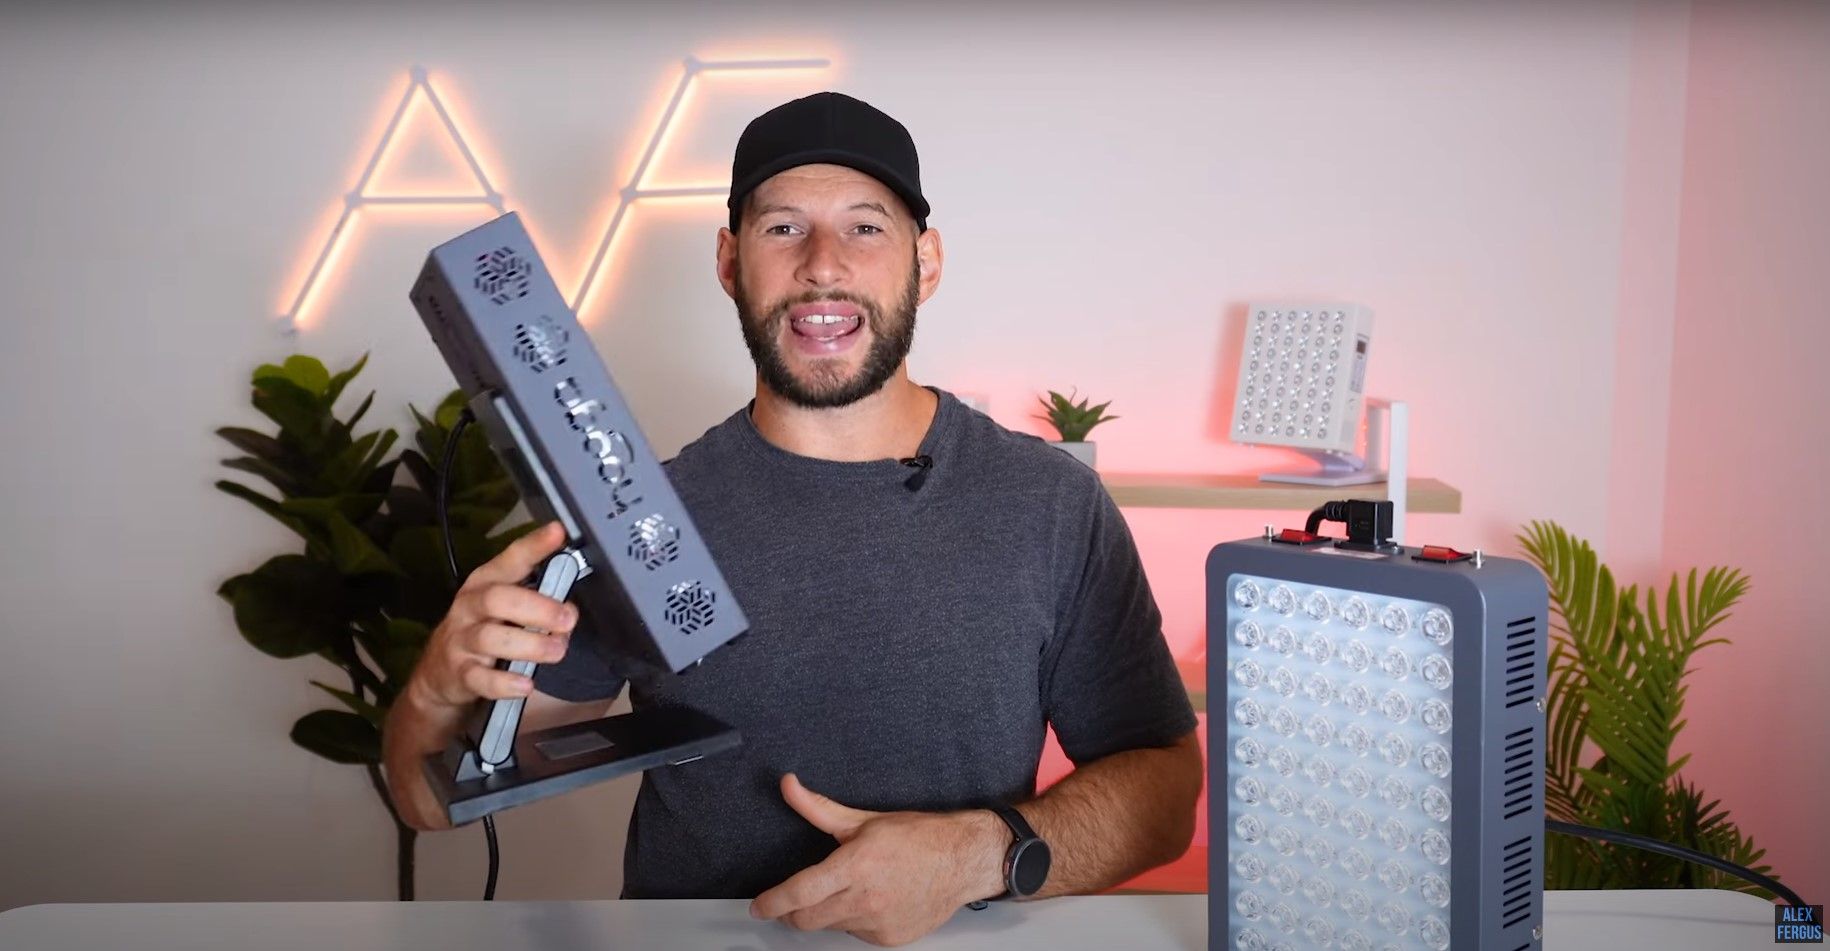 Alex holds the Hooga PRO 300 light therapy panel by its stand